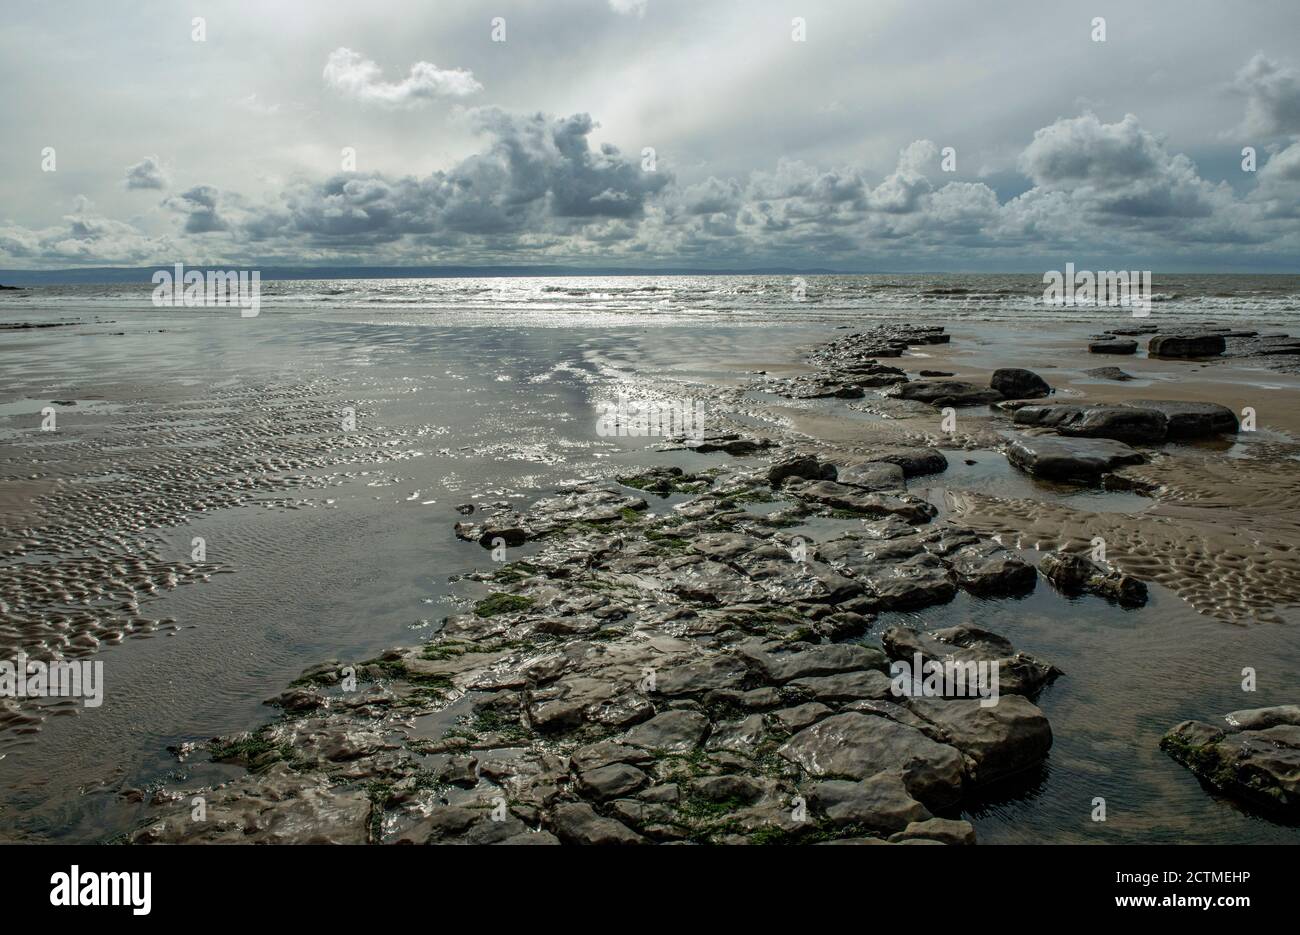 Dunraven Bay, also known as Southerndown Beach, on a moody an grey day, with the tide receding back into the Bristol Channel. Glamorgan Heritage Coast. Stock Photo